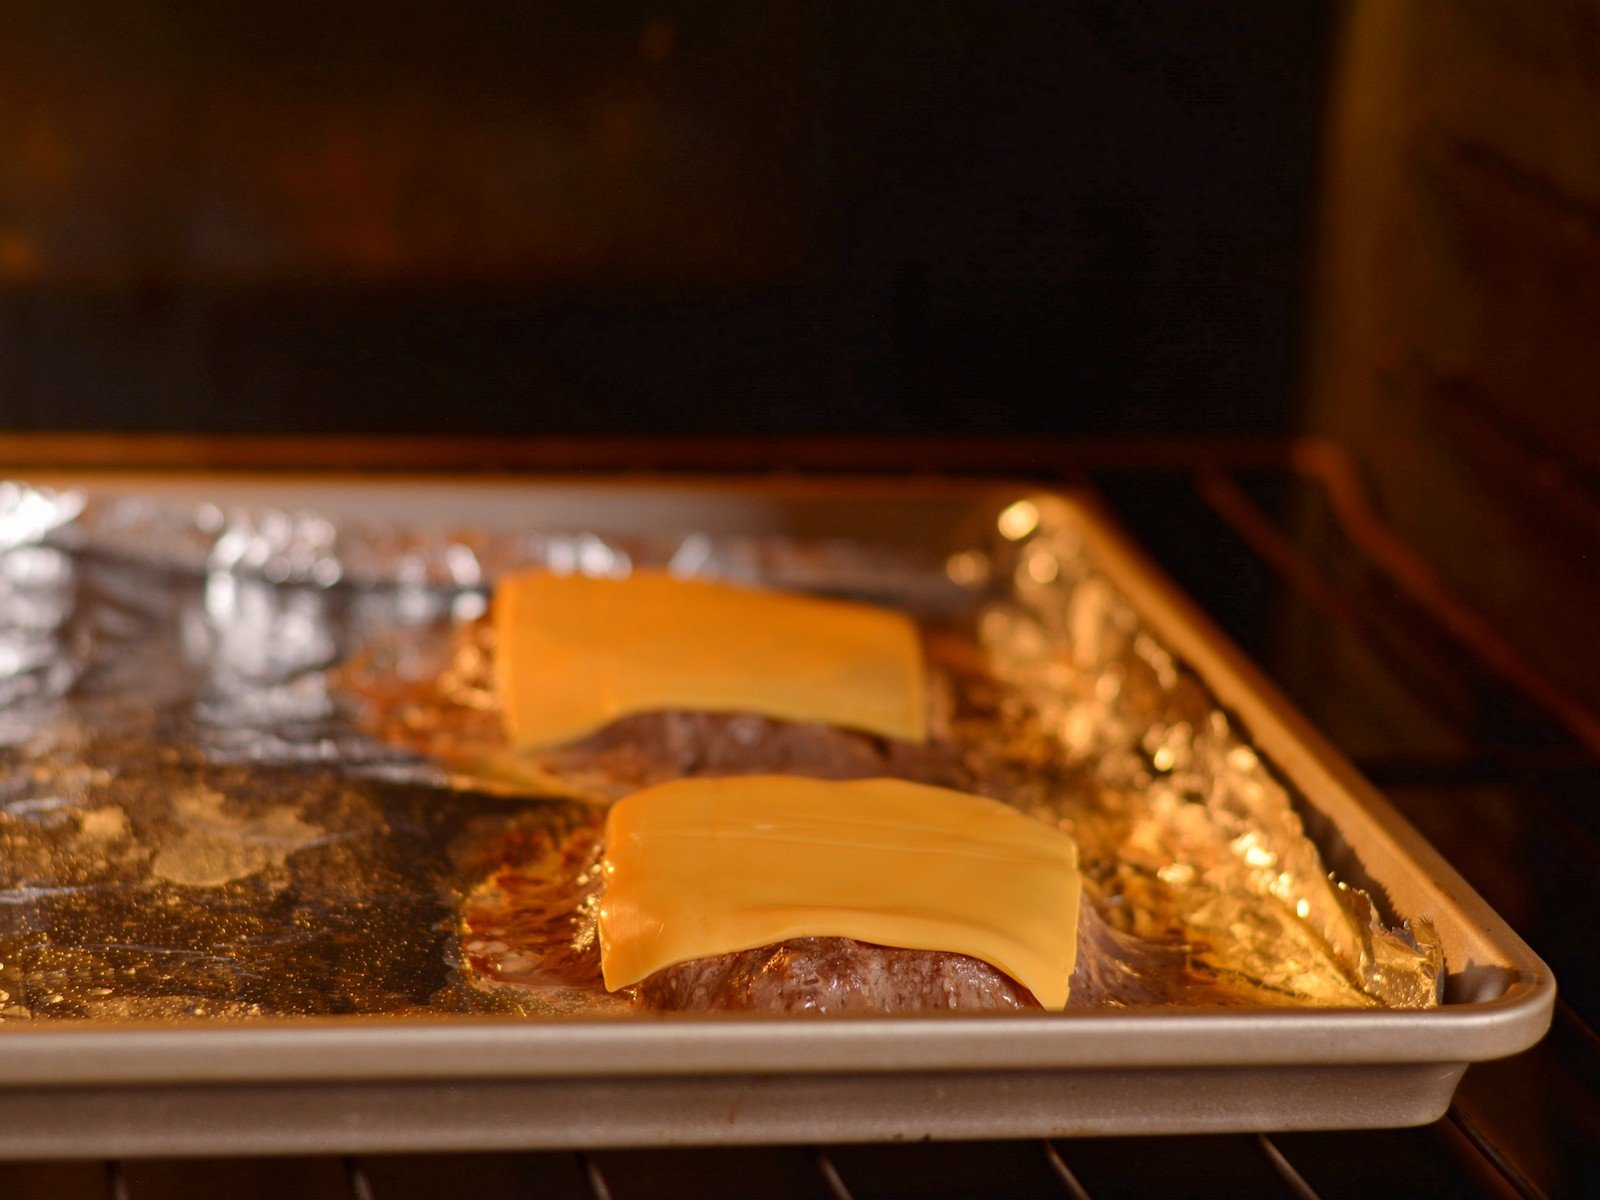 Two burgers with cheese on top of a baking sheet in the oven.